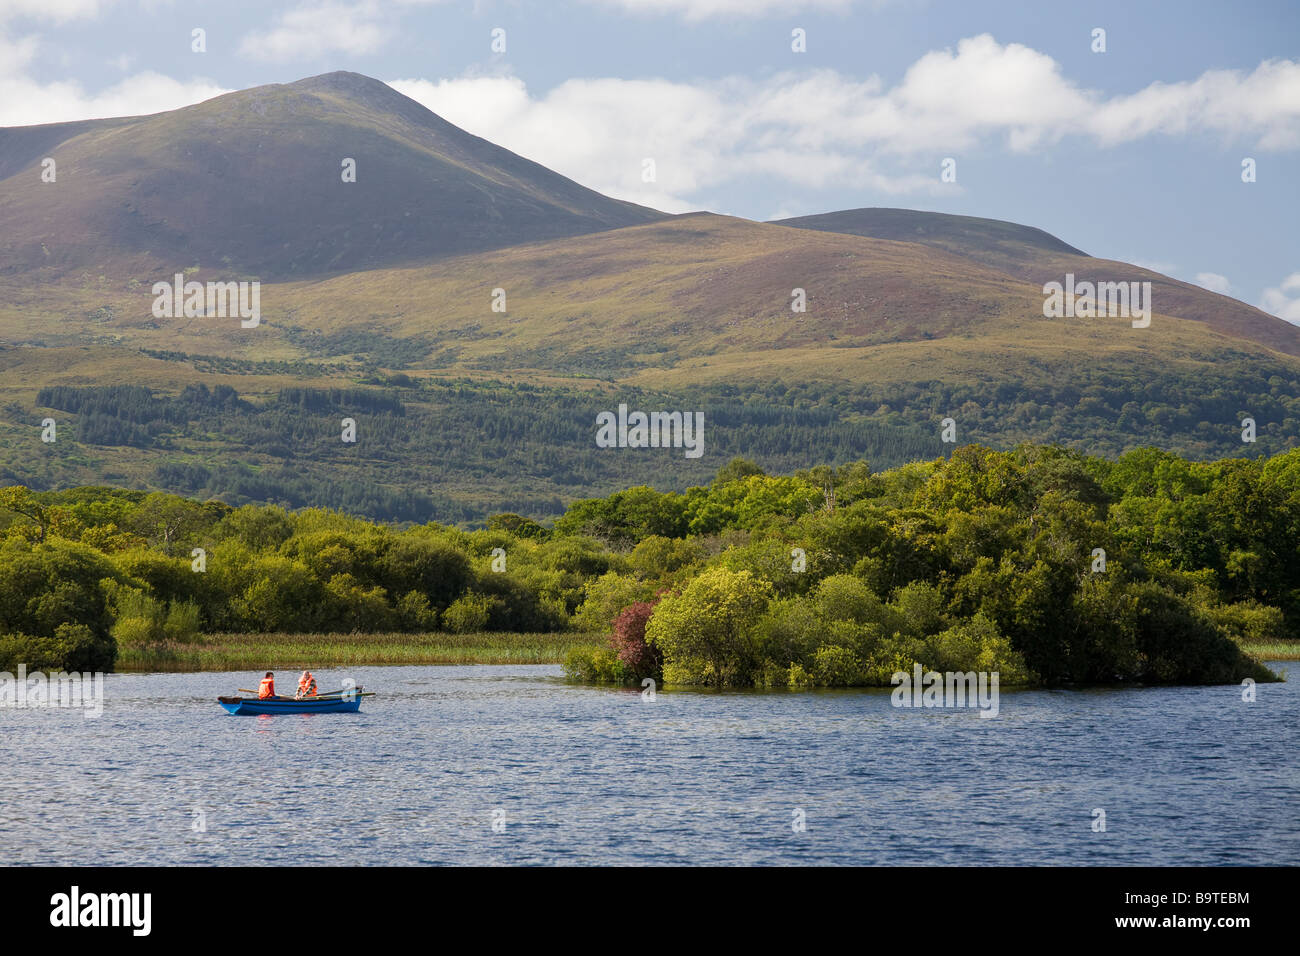 Punt on Killarney Lake. A couple rows out across Killarney lake with the famous mountains in the background. Stock Photo